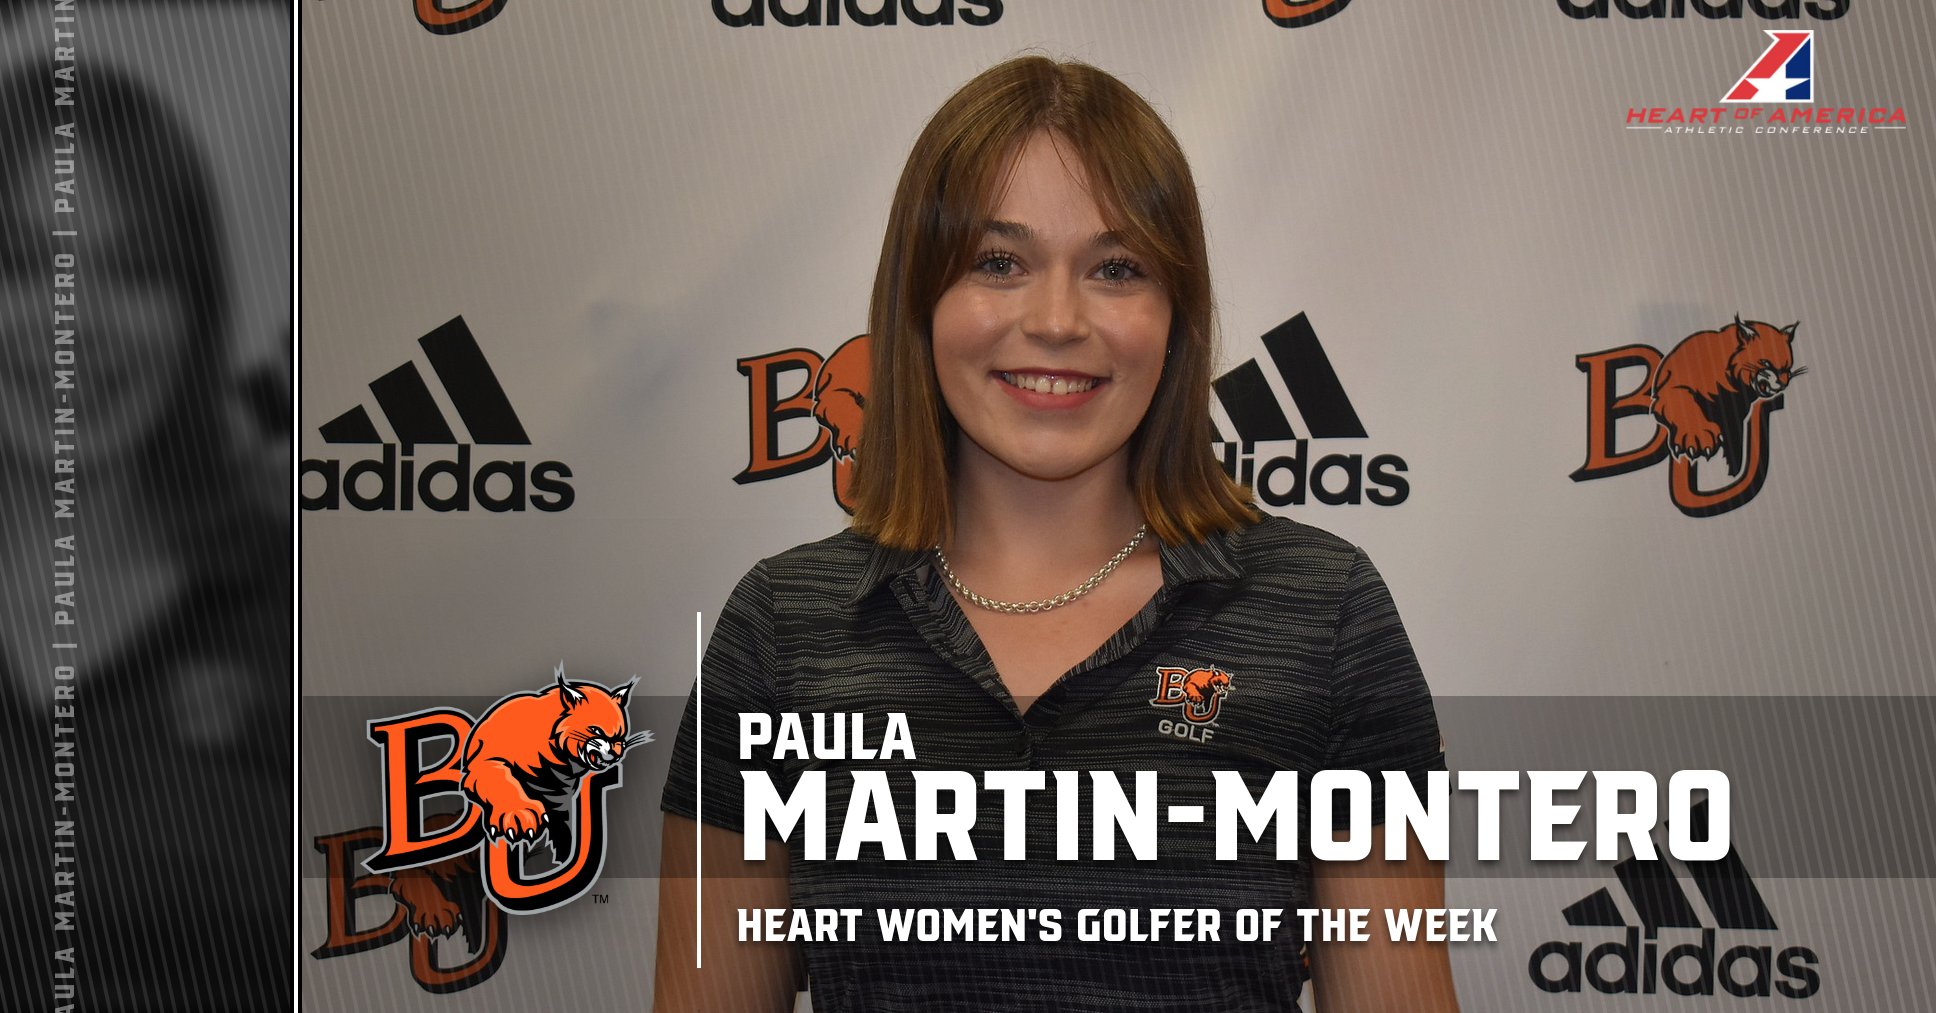 Martin-Montero Selected Heart Women&rsquo;s Golfer of the Week